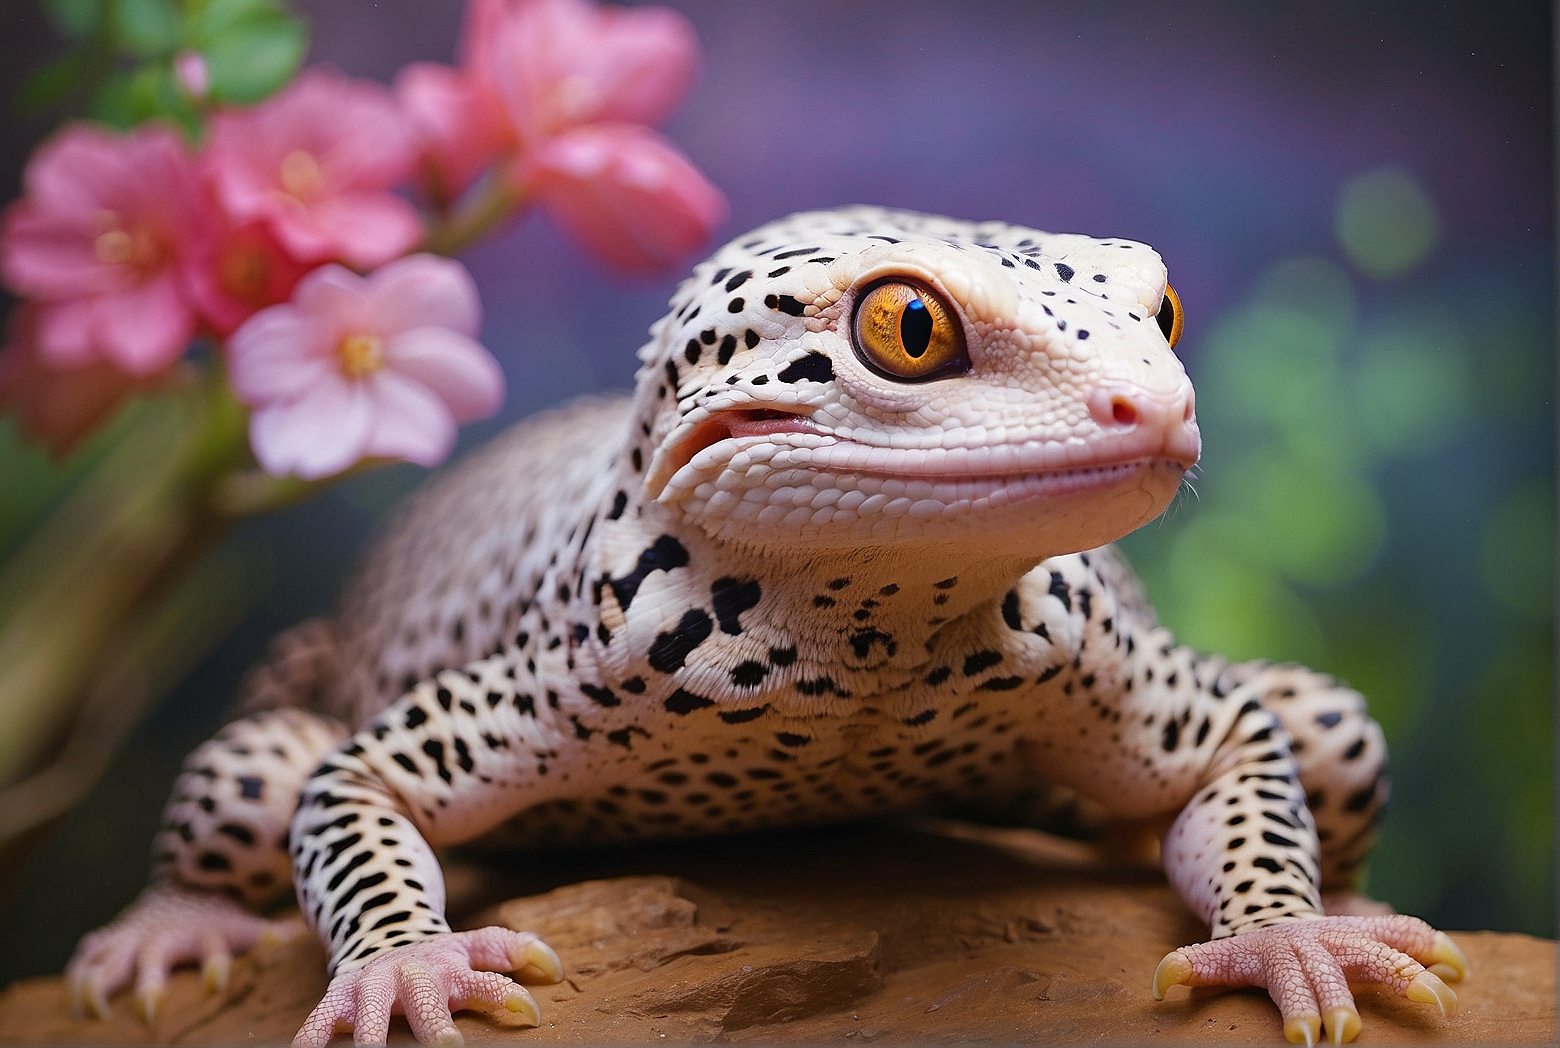 Can People Be Allergic To Leopard Geckos?